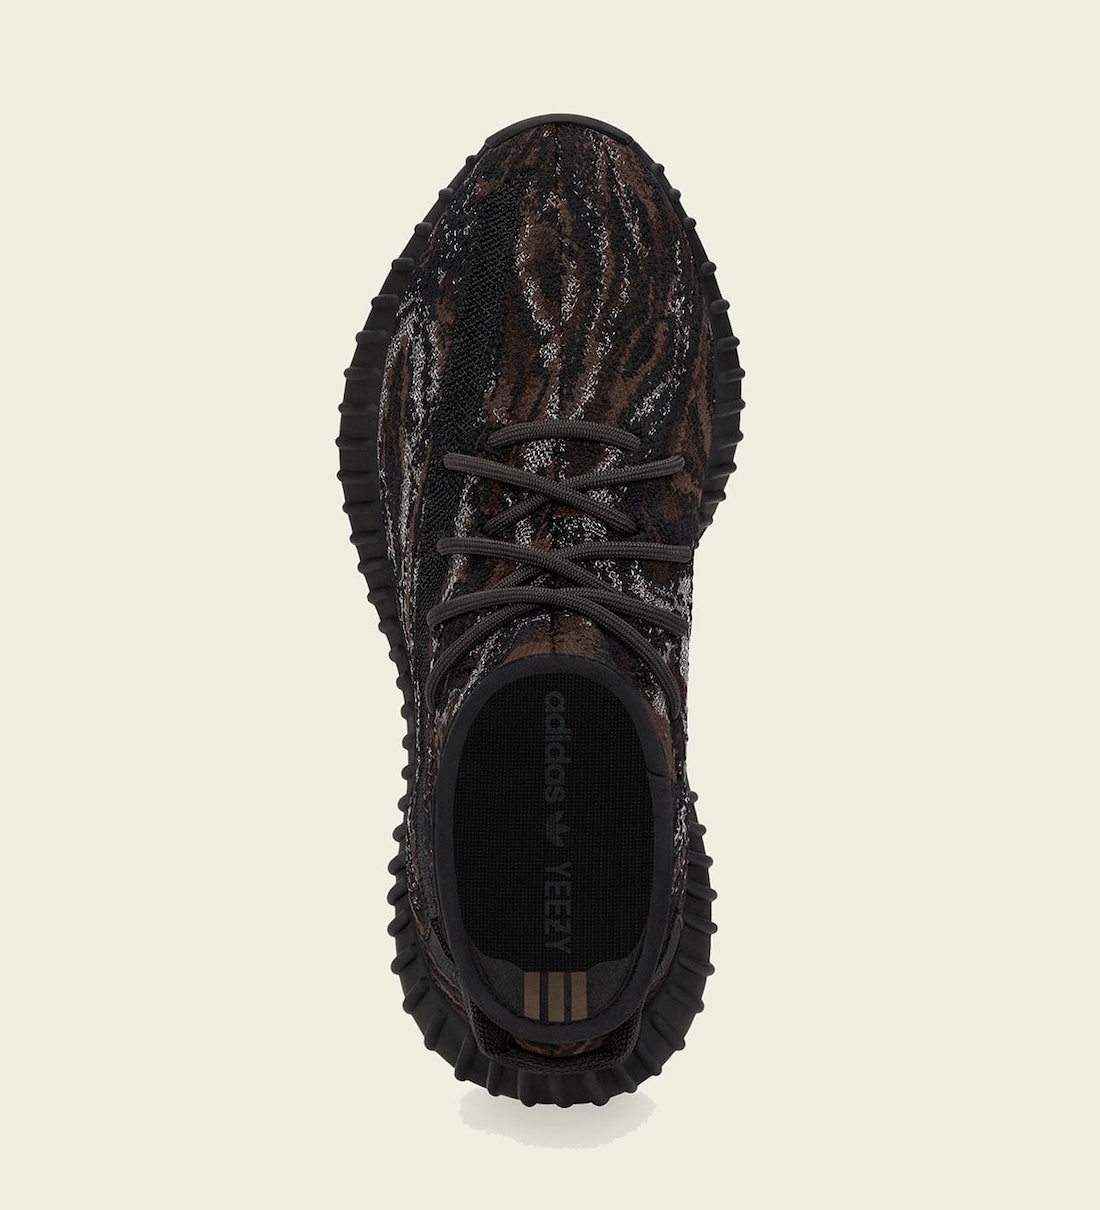 adidas-Yeezy-Boost-350-V2-MX-Rock-GW3774-Release-Date-Price-3